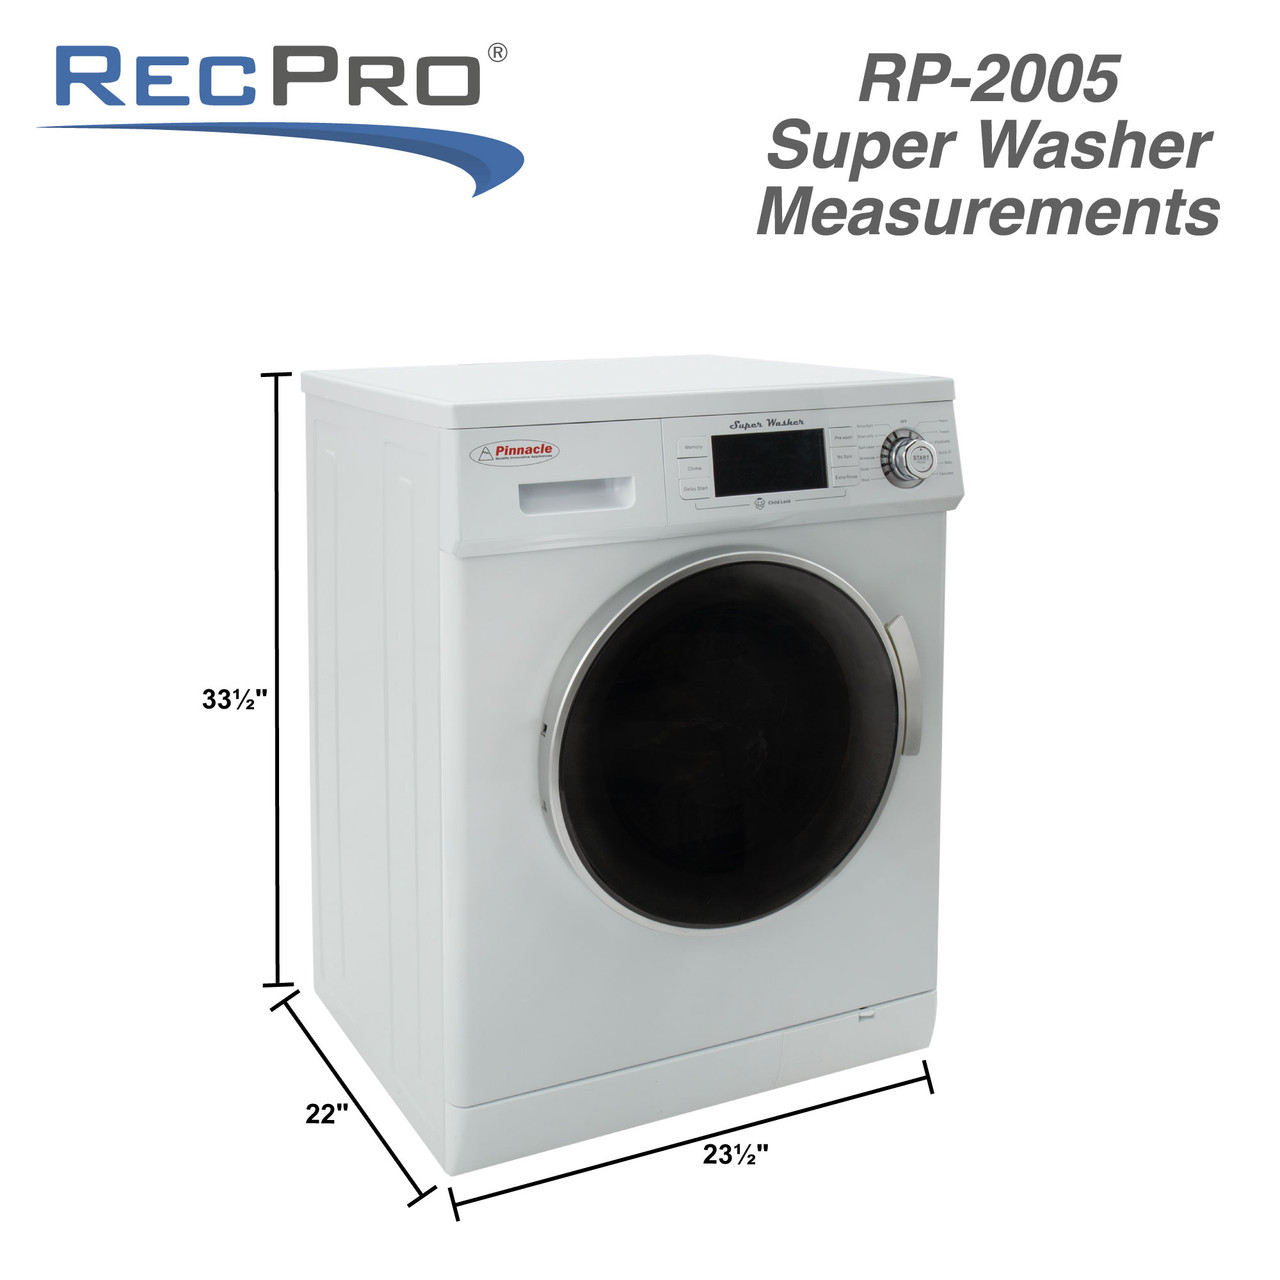 https://cdn11.bigcommerce.com/s-kwuh809851/images/stencil/1280x1280/products/1820/14449/RP-2005-Super-Washer-Measurements__00888.1698946385.jpg?c=2&imbypass=on